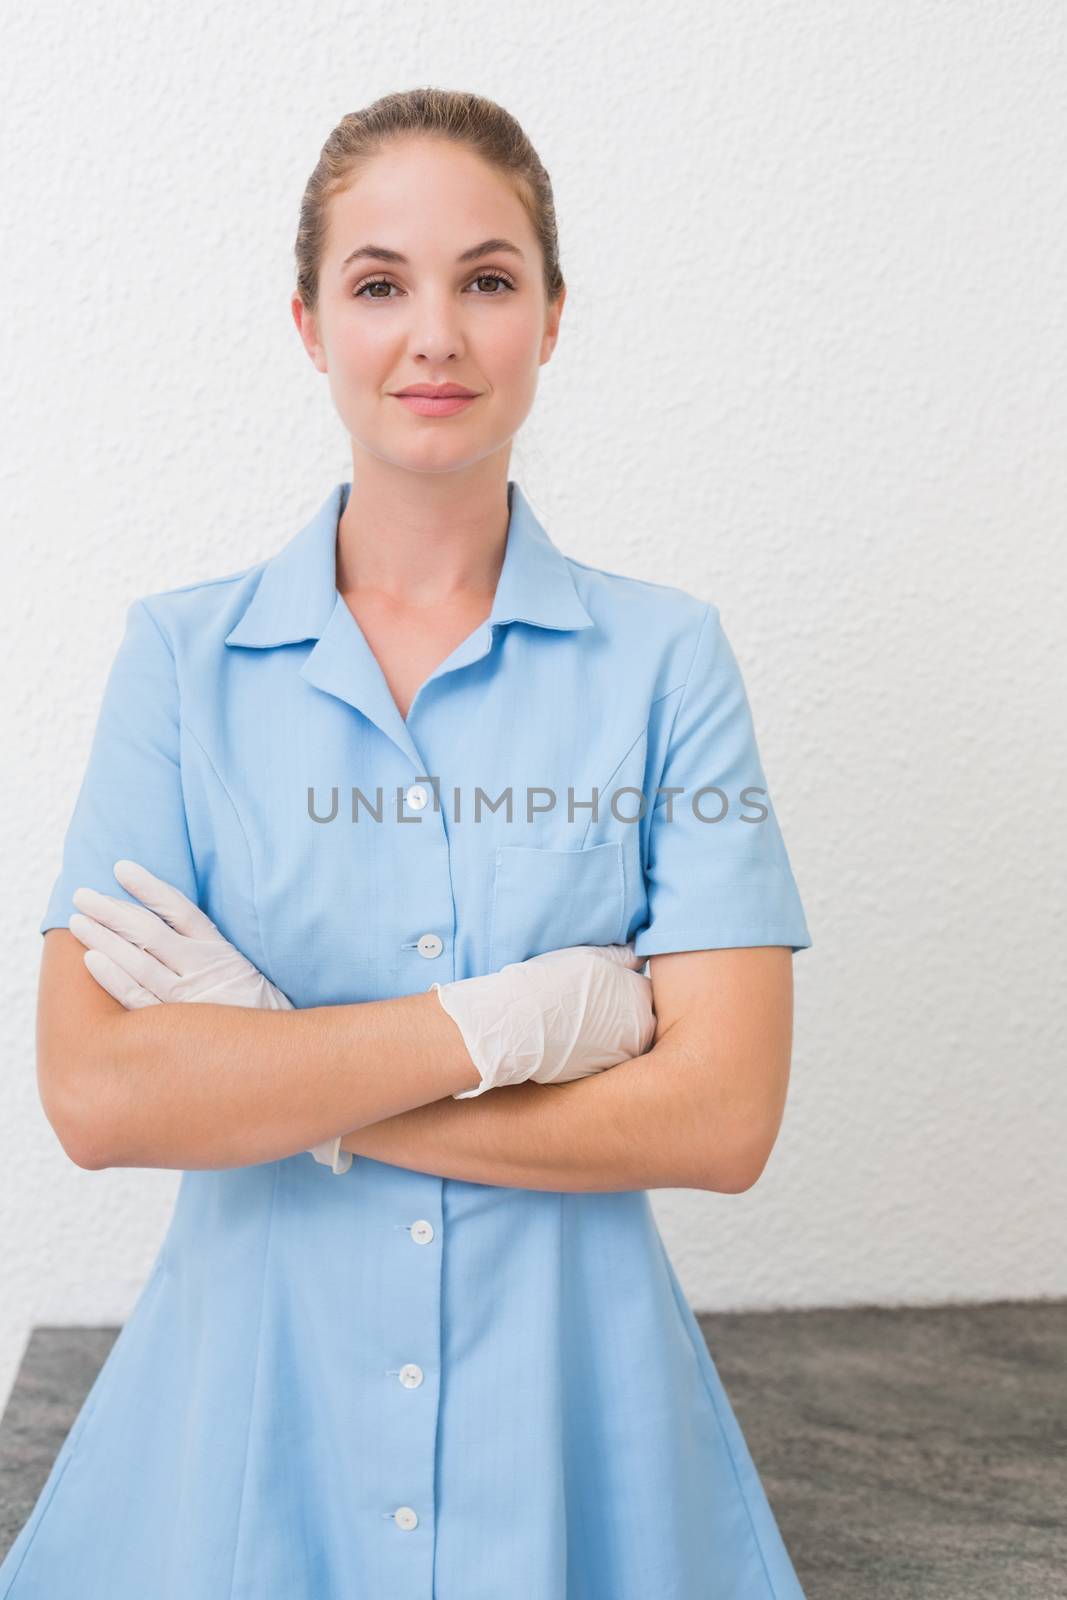 Smiling dental assistant looking at camera by Wavebreakmedia